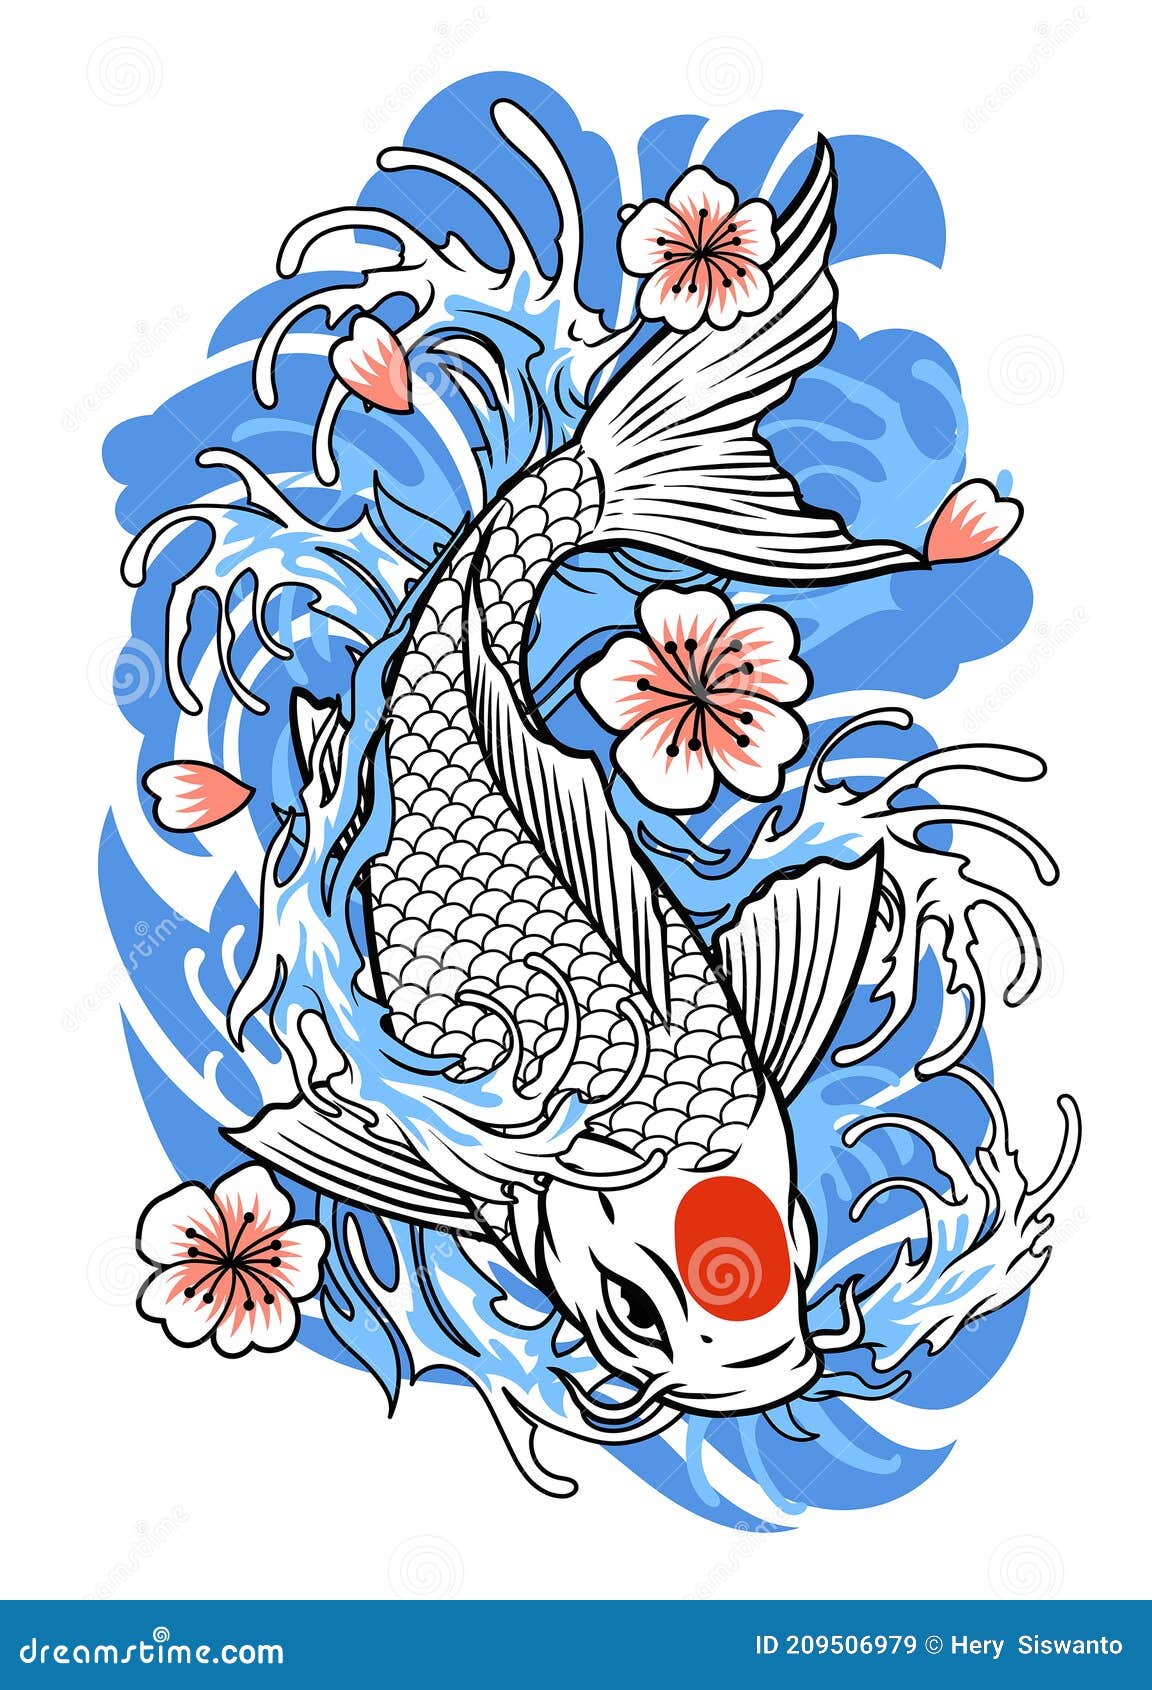 Zen Doodle Koi Fish Tangles Adult Coloring Page Illustration Style Stock  Illustration  Download Image Now  iStock